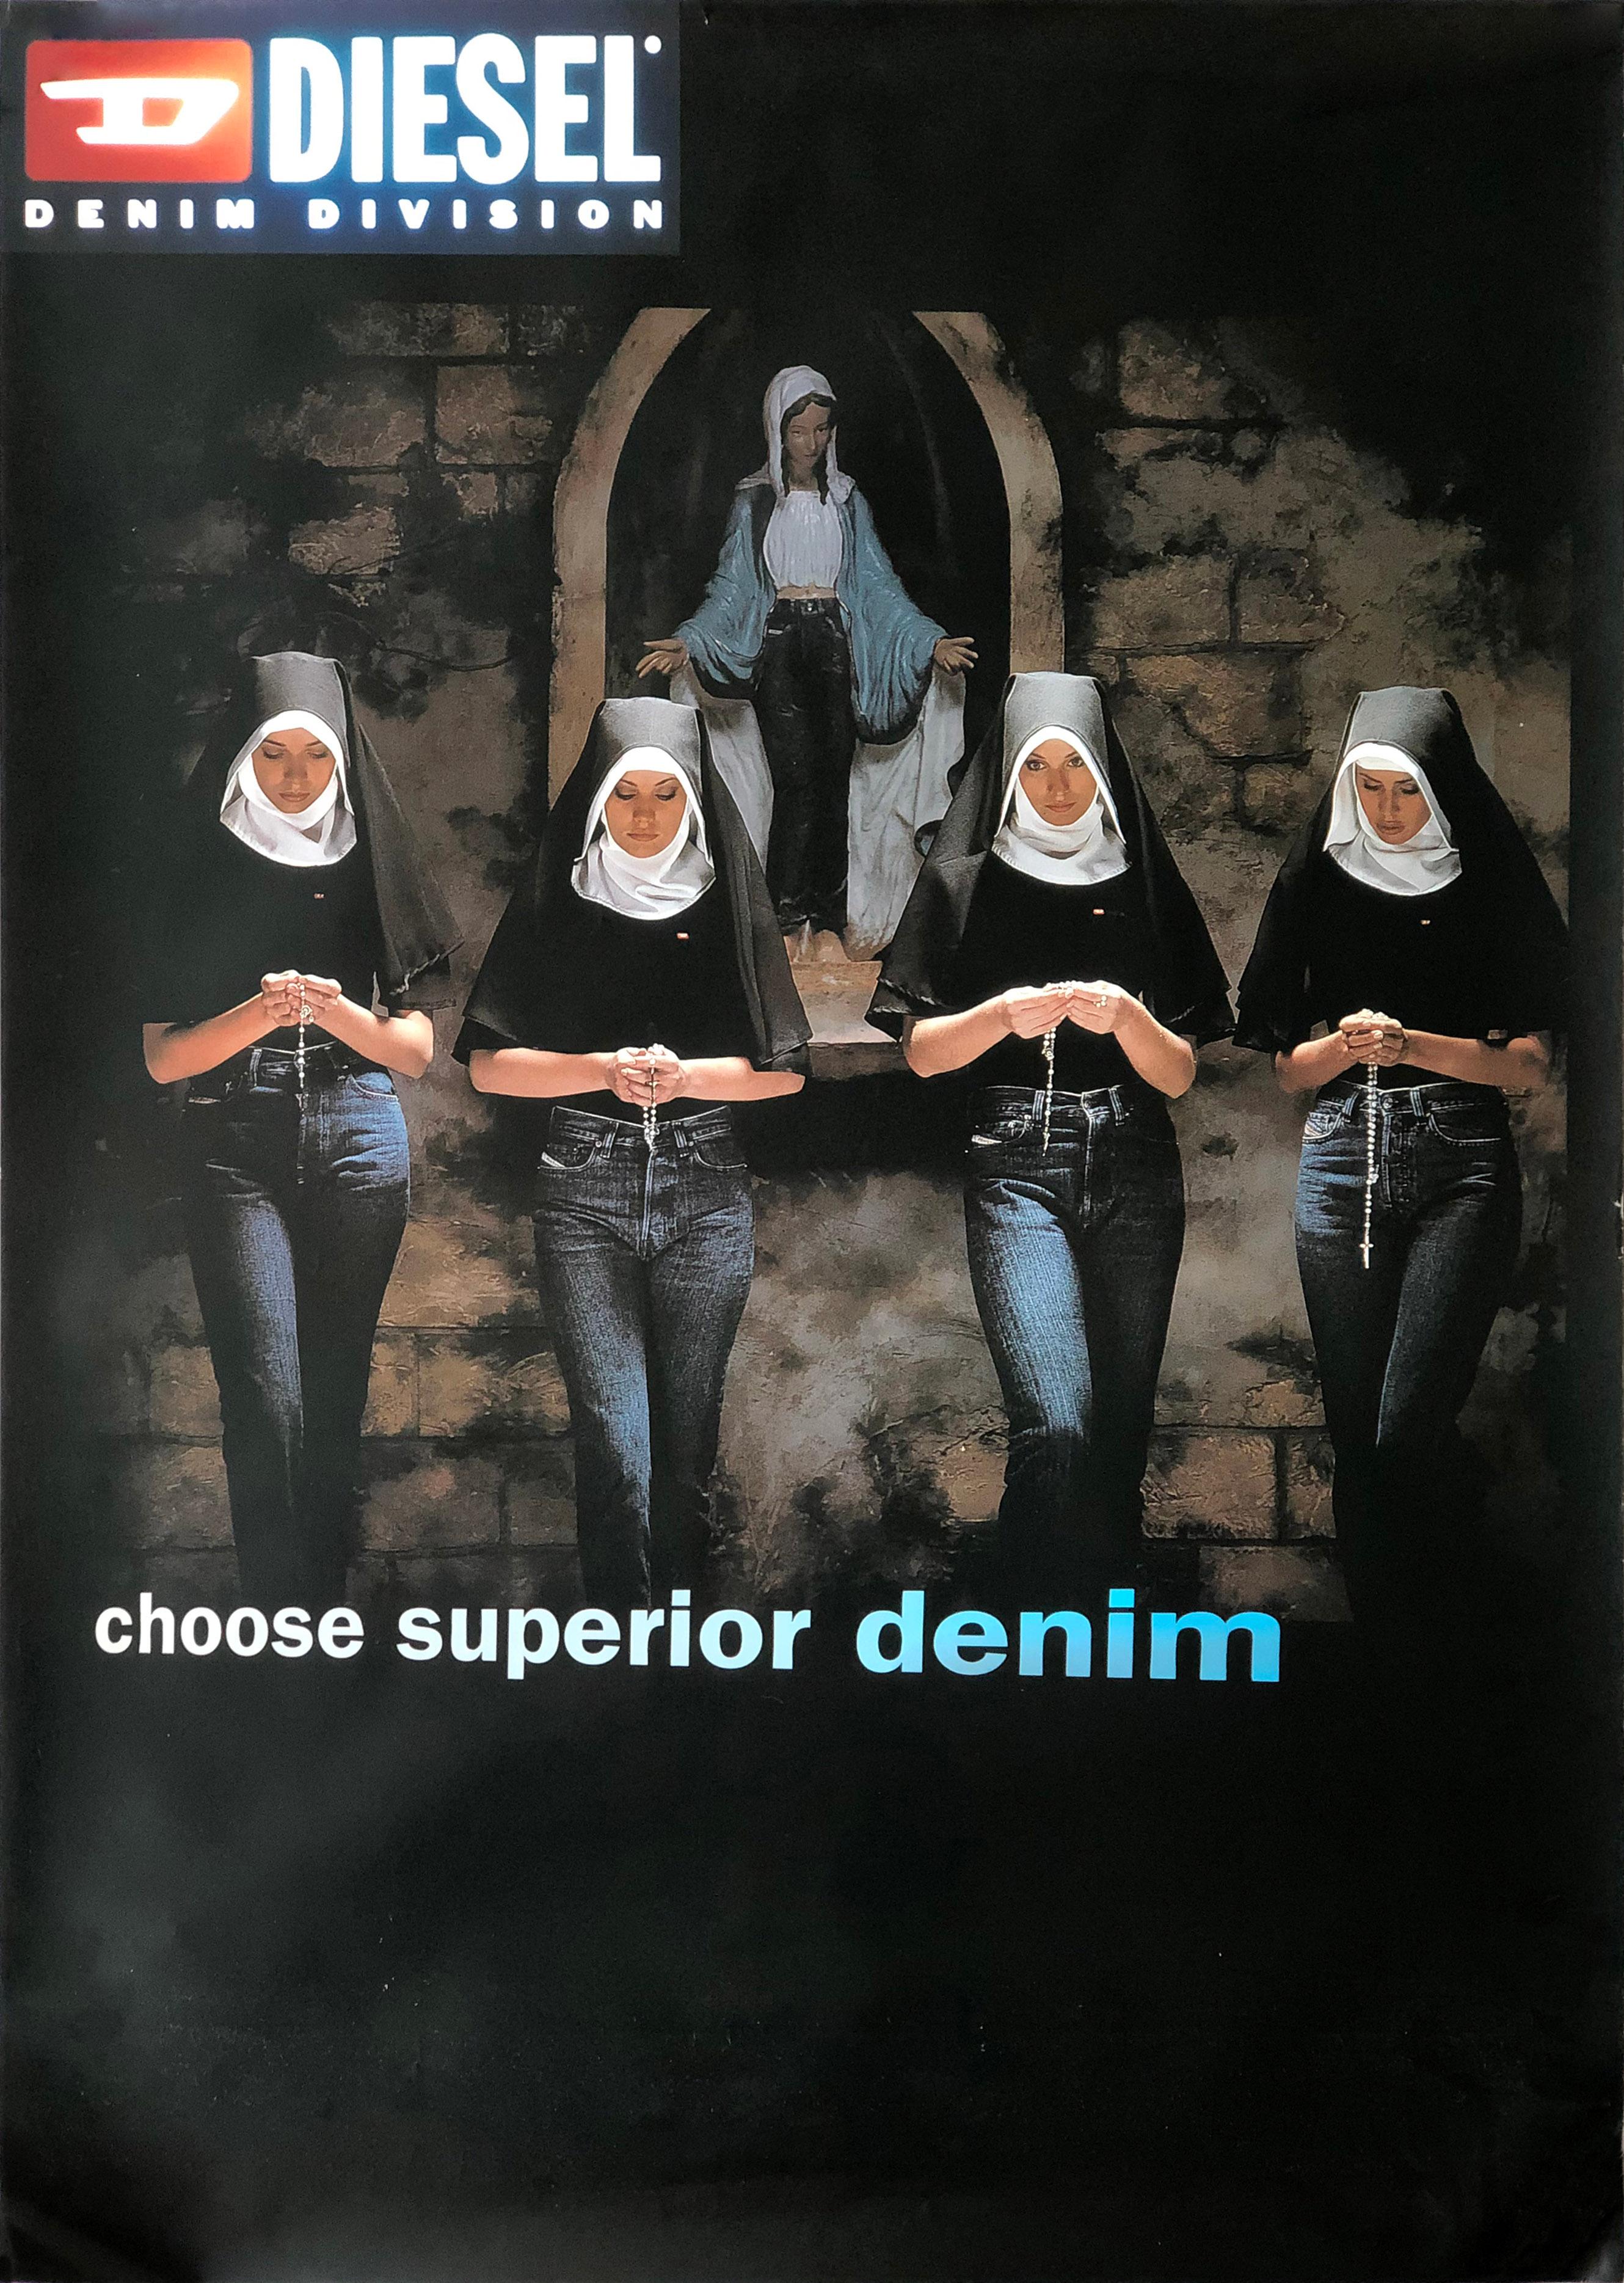 Erwin Olaf - Fashion Victims - 1998 Diesel (DSL) Dirty Denim - Original billboard poster
A group of praying young nuns in Diesel jeans/denim.
Measurements 70 x 100 cm

At the time controversial campaign for Diesel Denim by Erwin Olaf.
Original bus